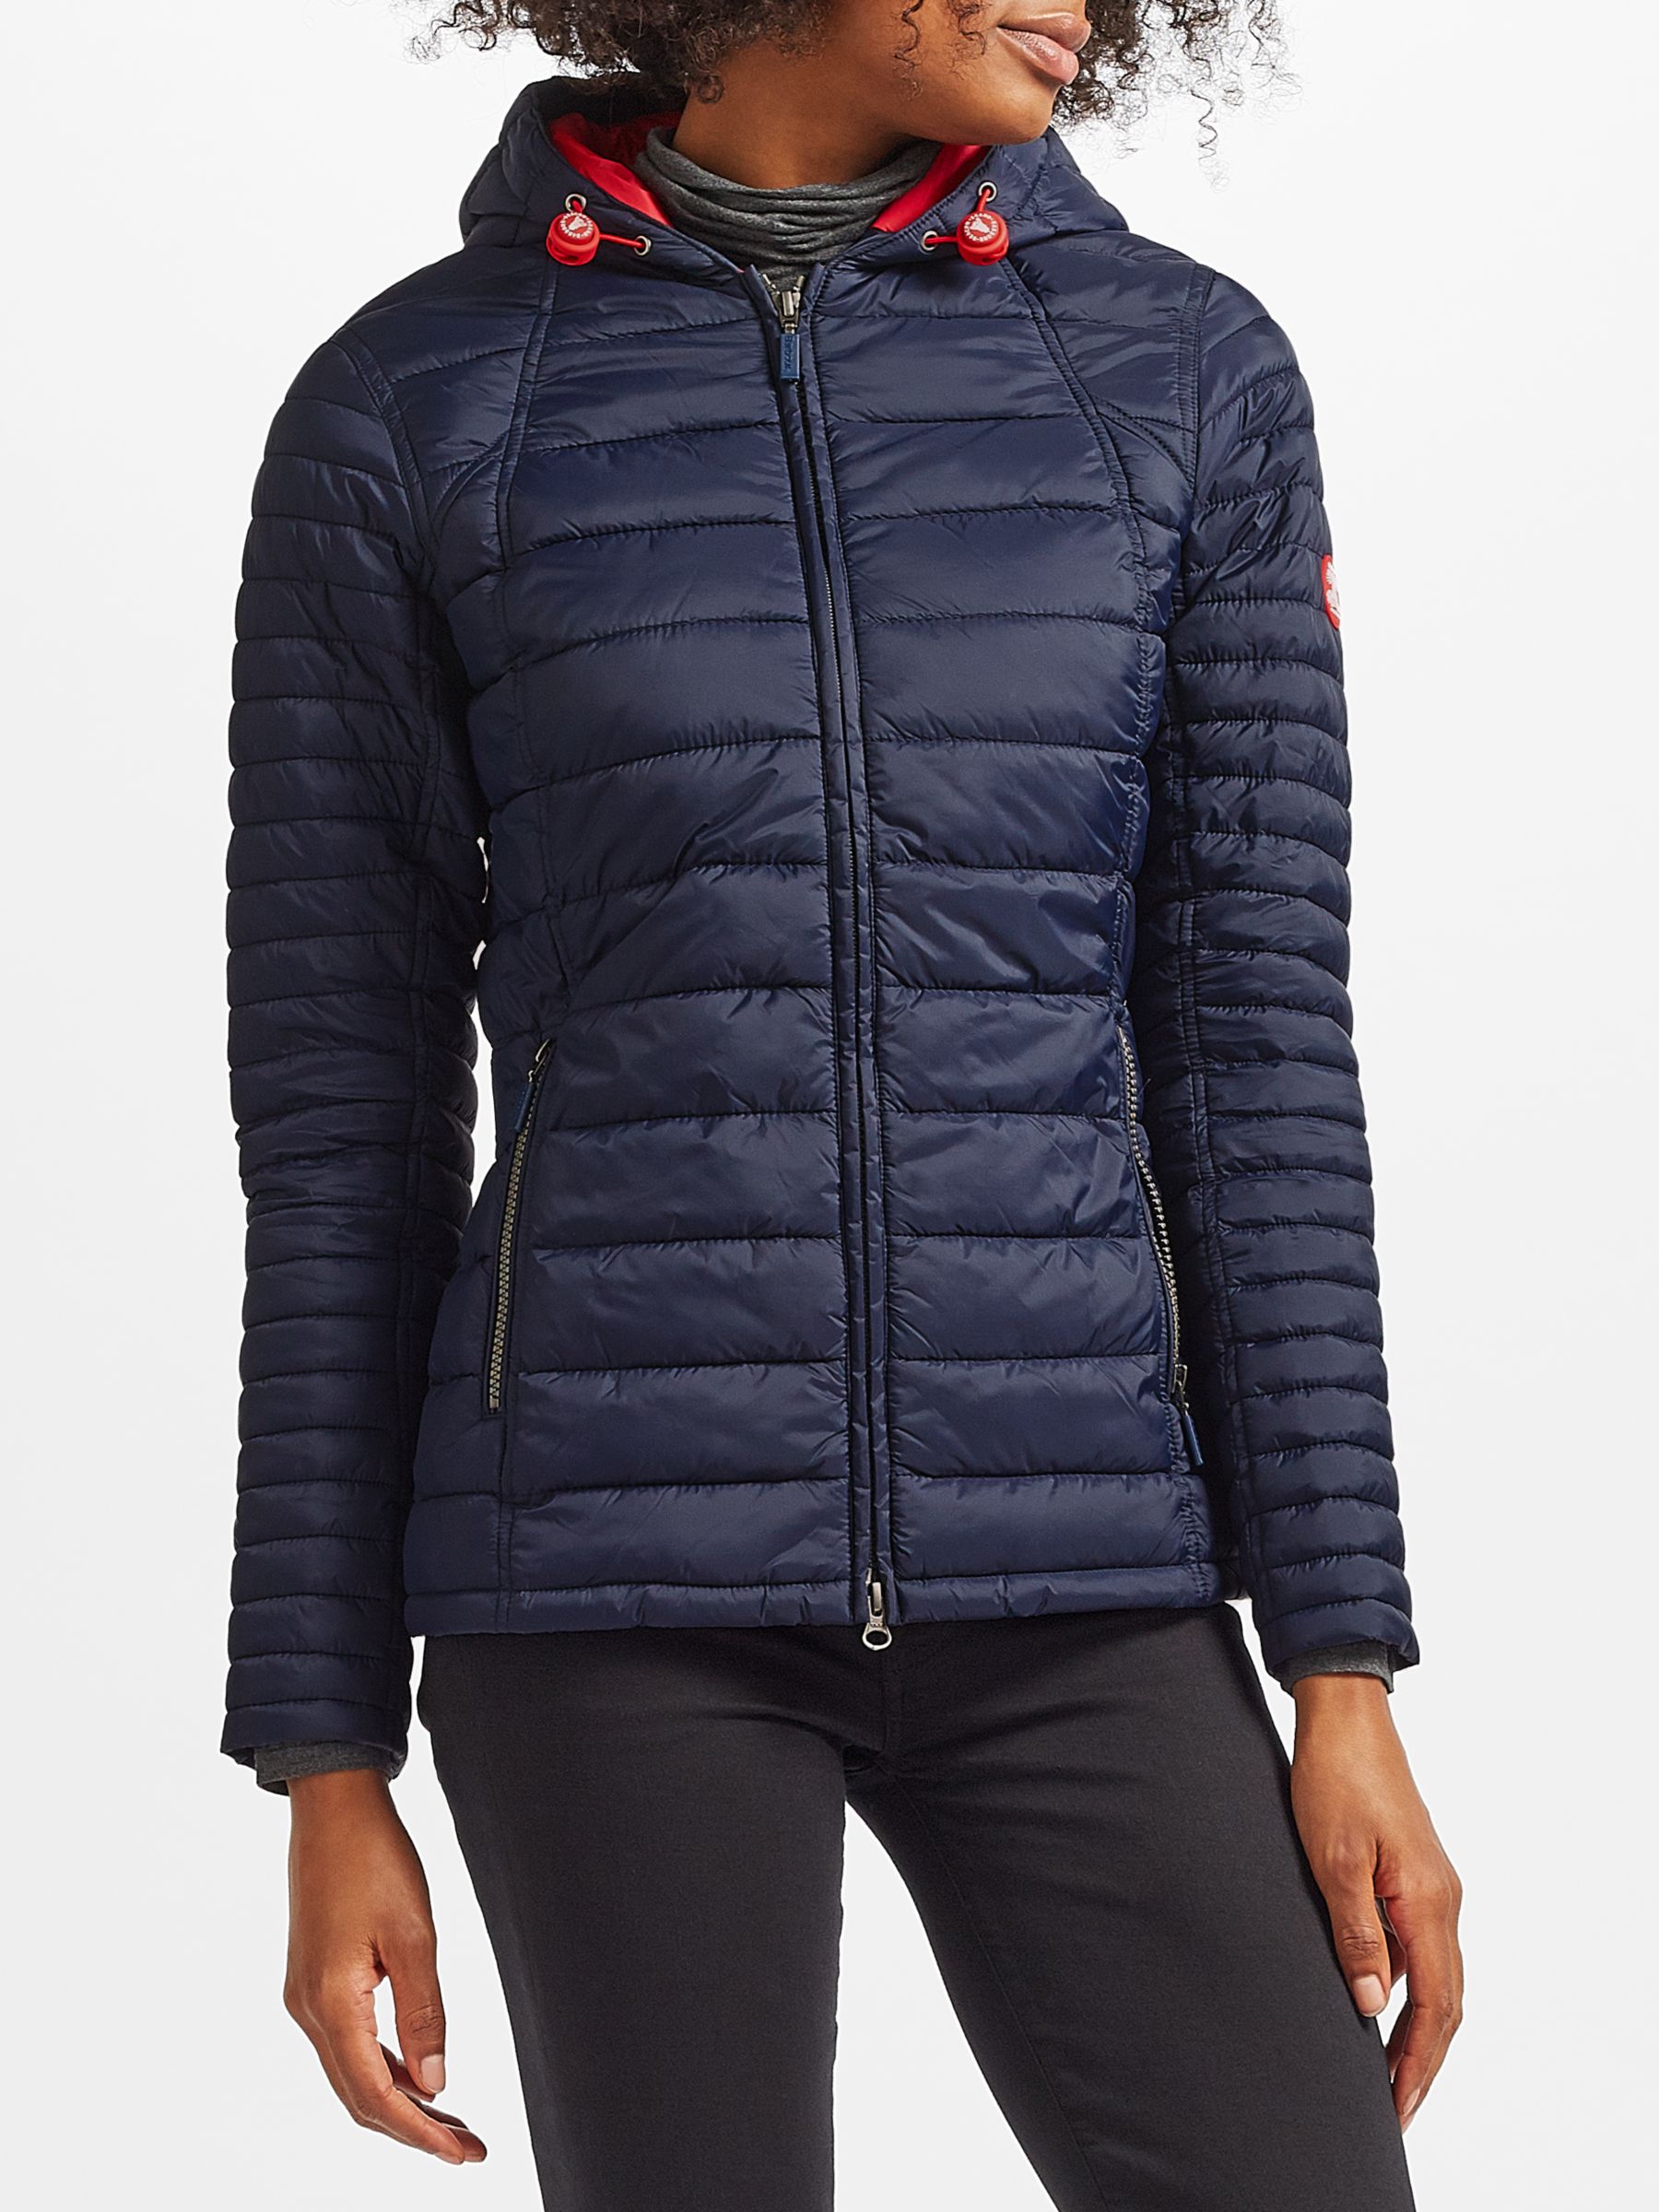 barbour landry baffle quilted jacket